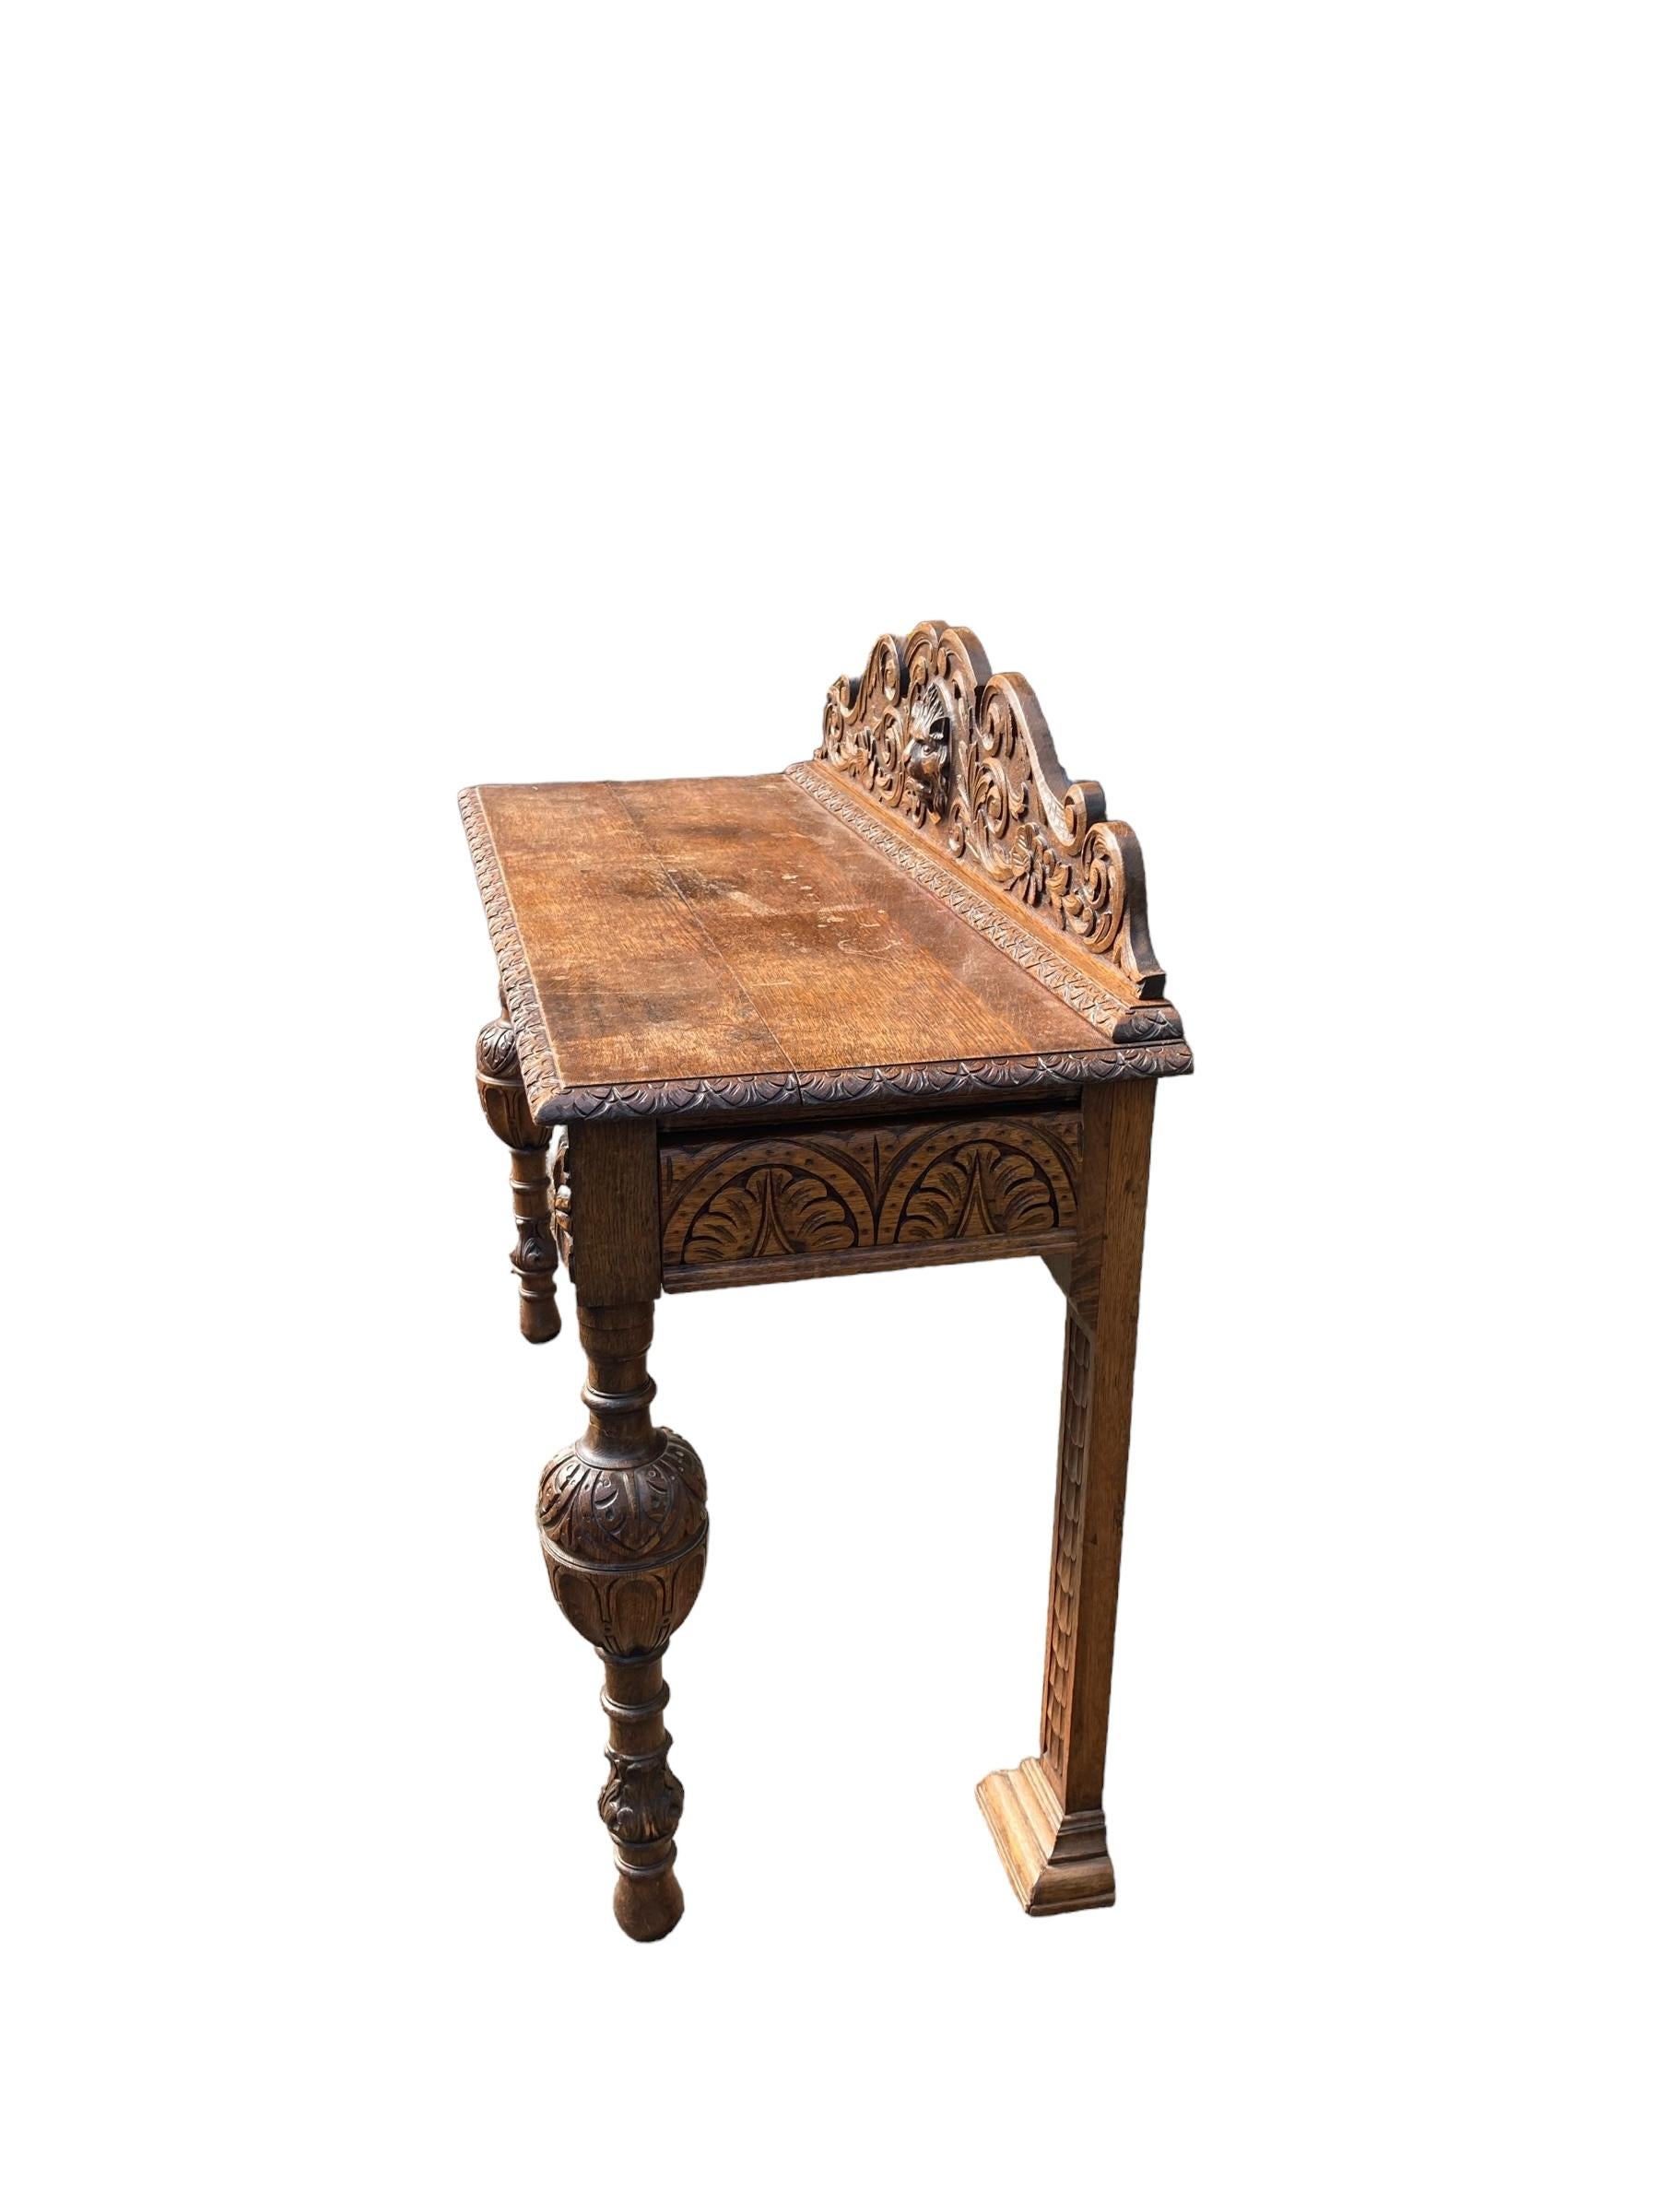 19th Century Victorian Carved Oak Sideboard or Hall Table, Rampant Lions Head Carvings, ornate carved legs, single draw to side. Scottish CIRCA 1860. Finely carve rear upstand. Beautiful colour and grain to the Oak

Whether it's Antique, Art Deco,